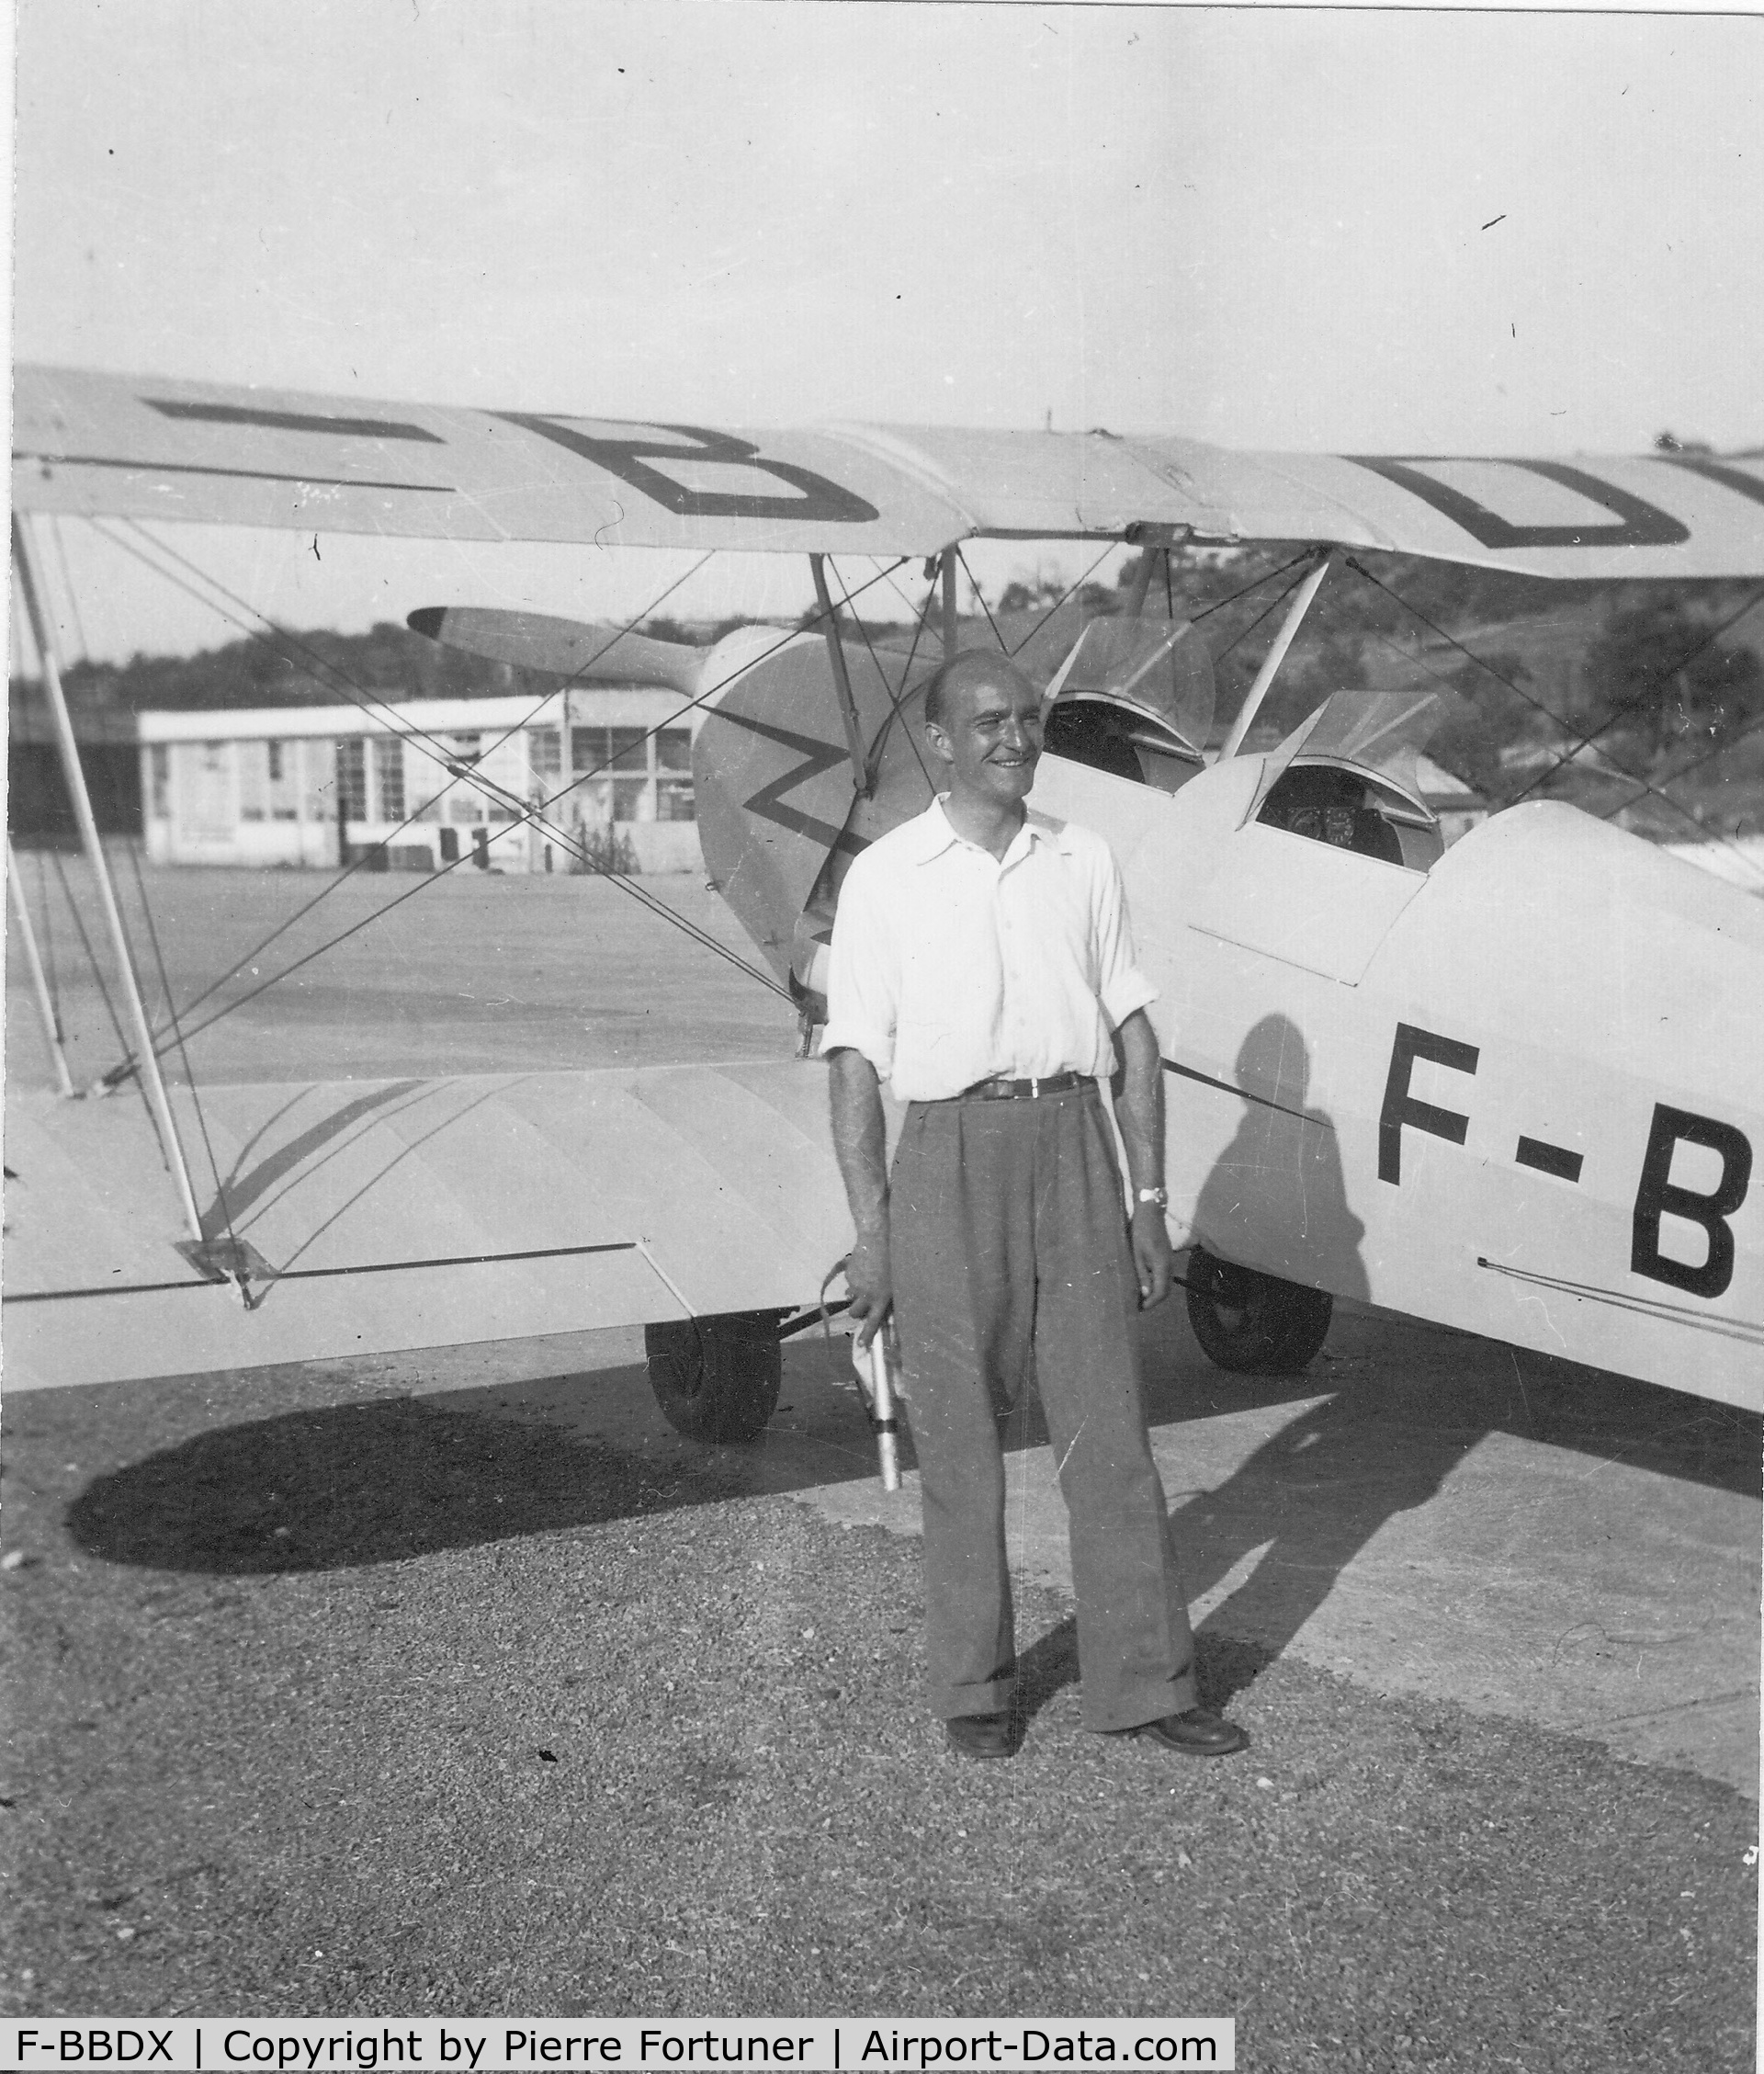 F-BBDX, Nord SV-4C Stampe C/N 50, Vichy-Rhue airport. 1949
Flight instructor Mr. Beauvillain in front of F-BDDX